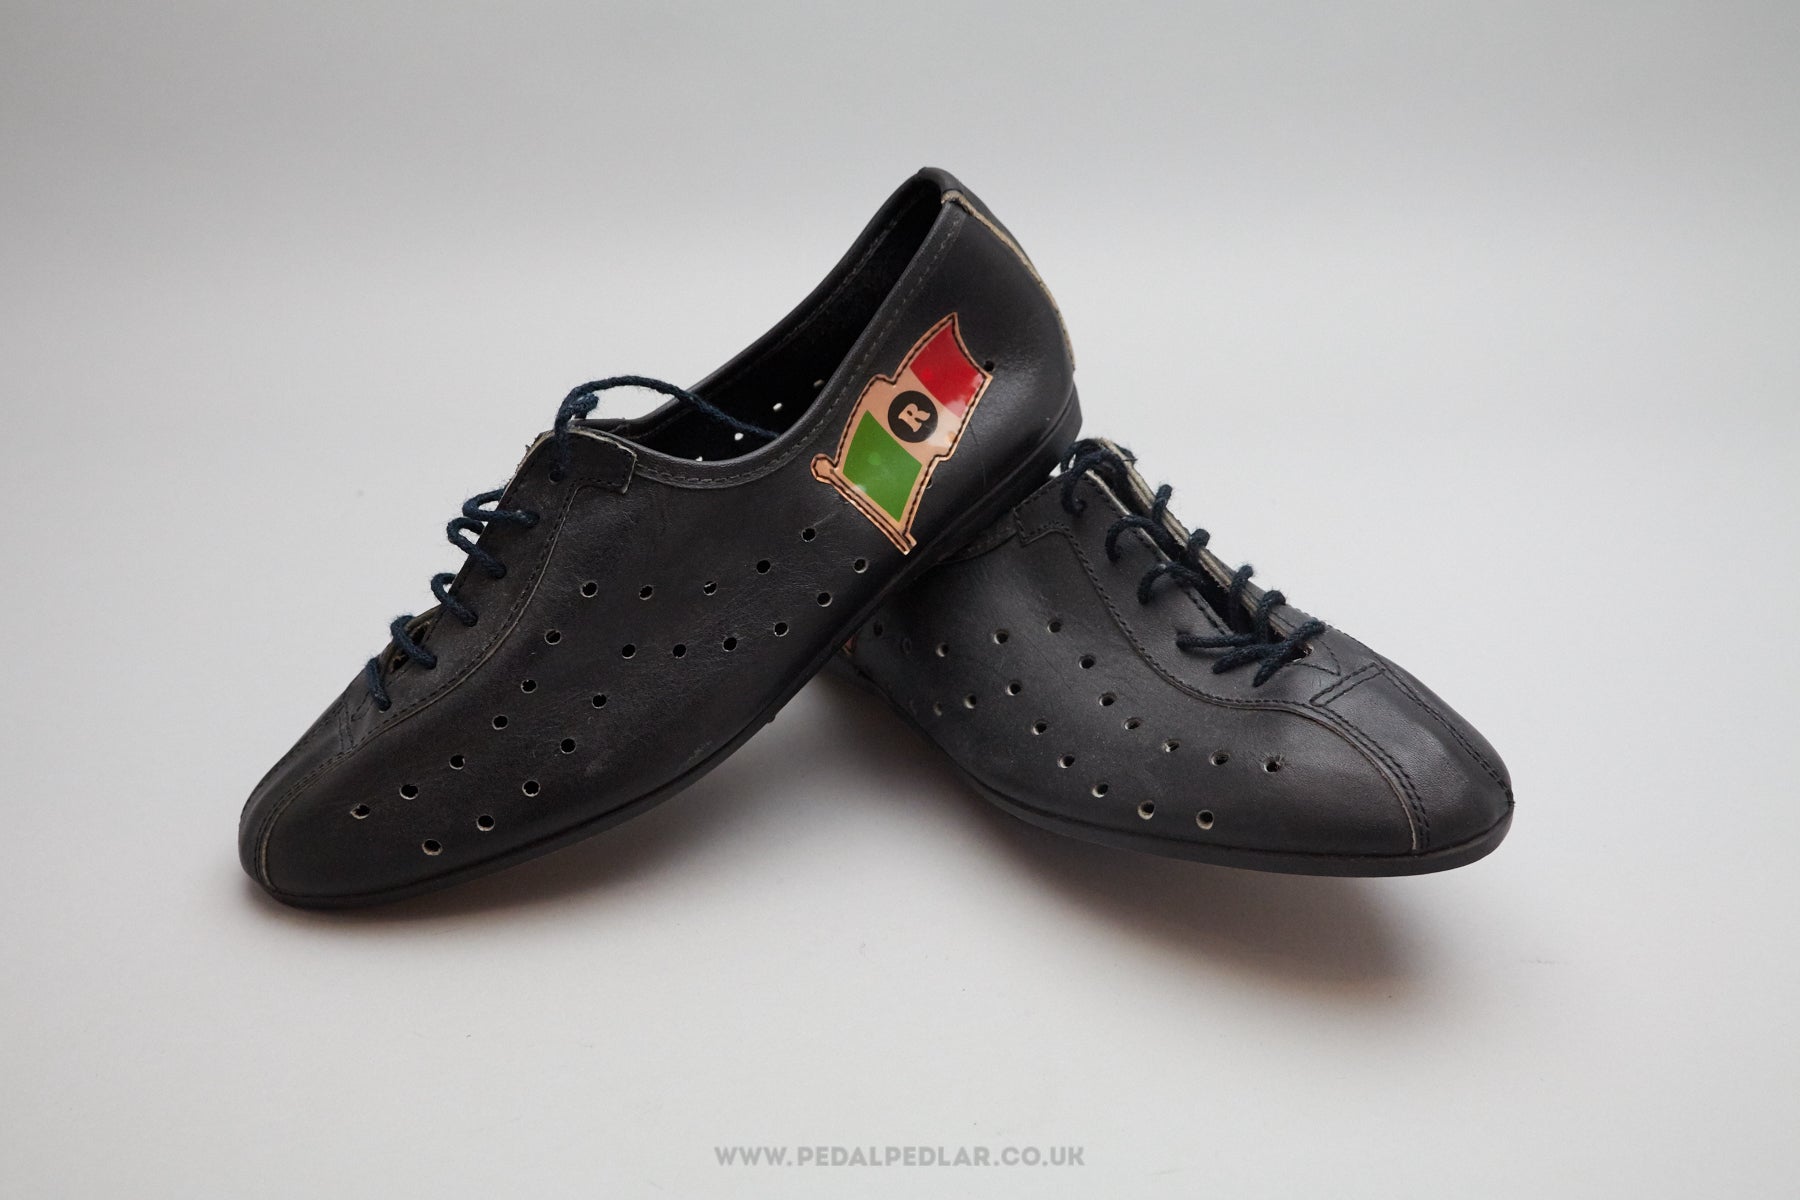 leather cycling shoes uk